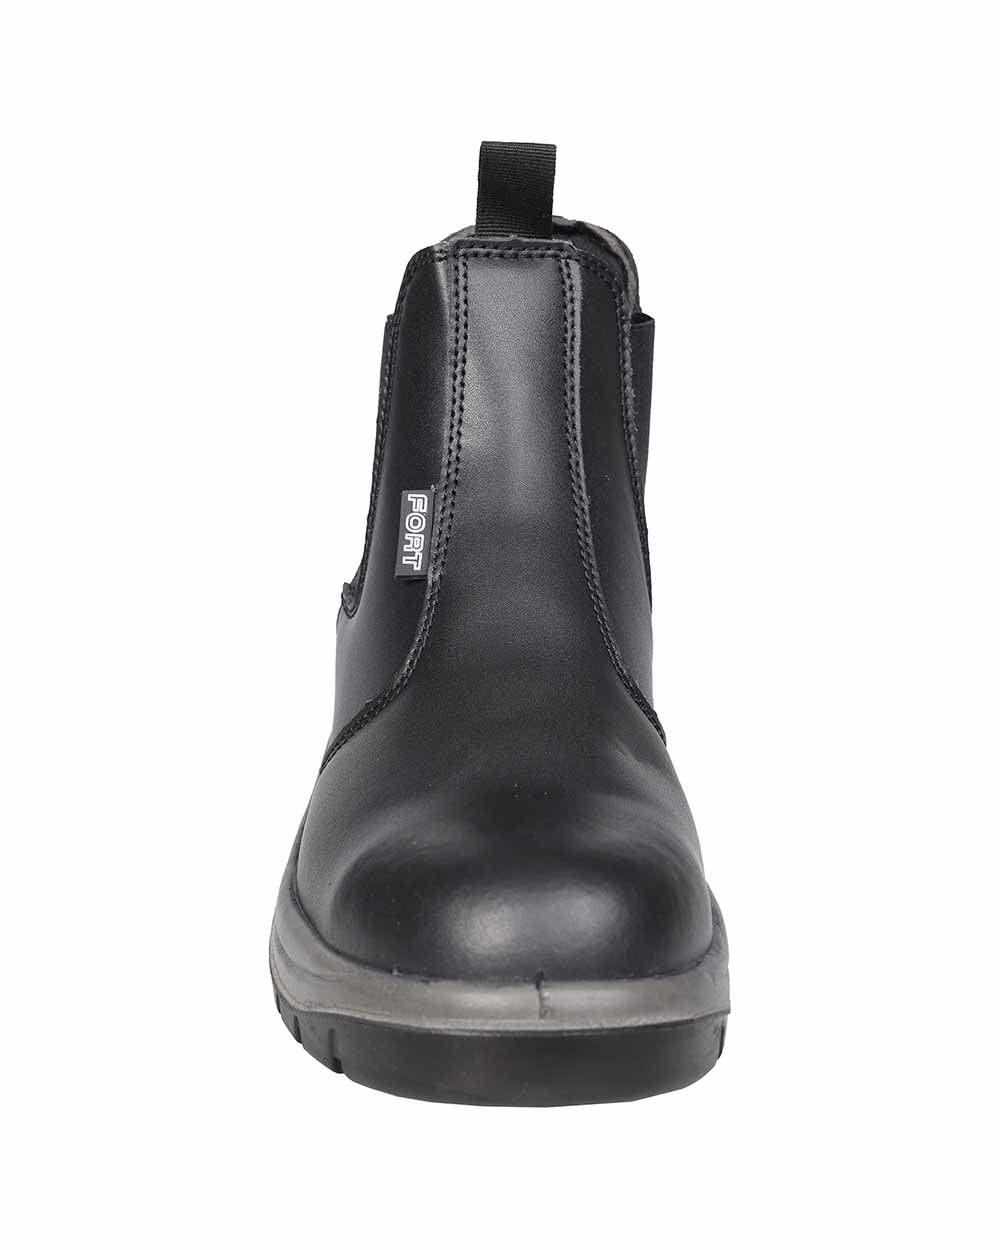 Toe Fort Nelson Safety Dealer Boots Steel toe 